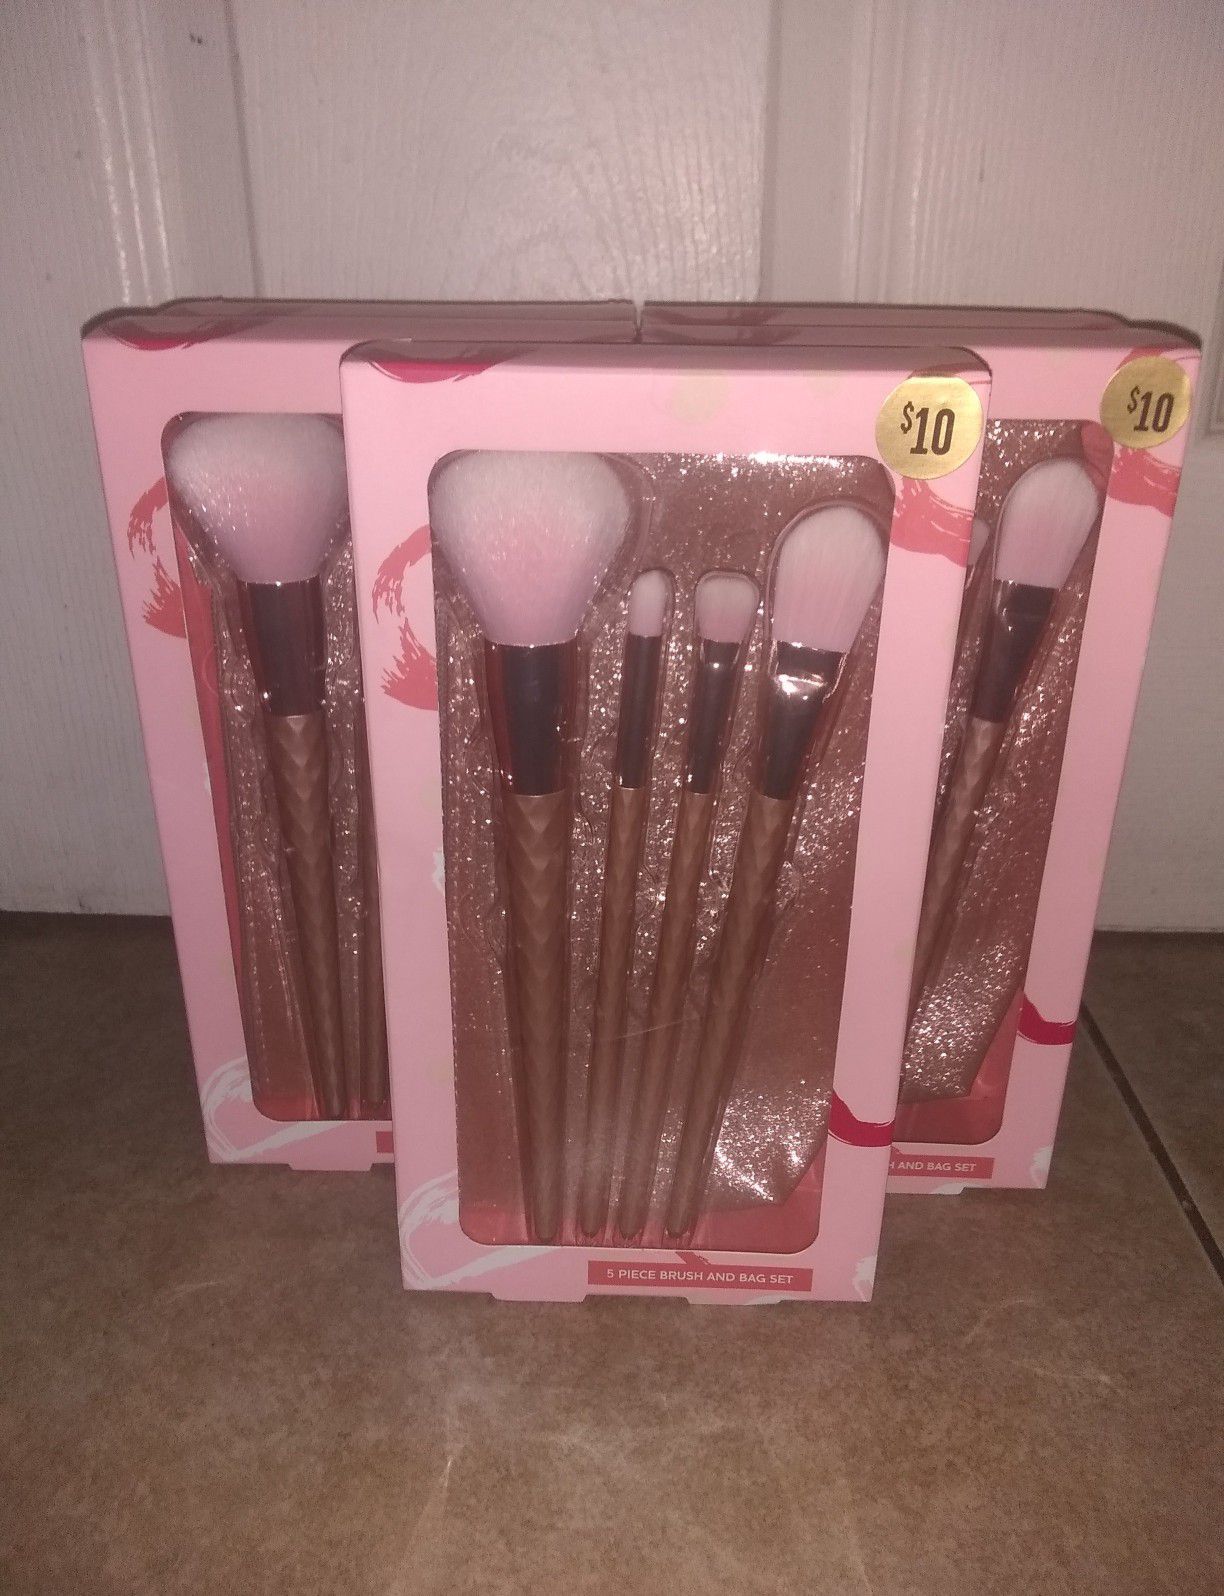 Makeup Brushes $5 each